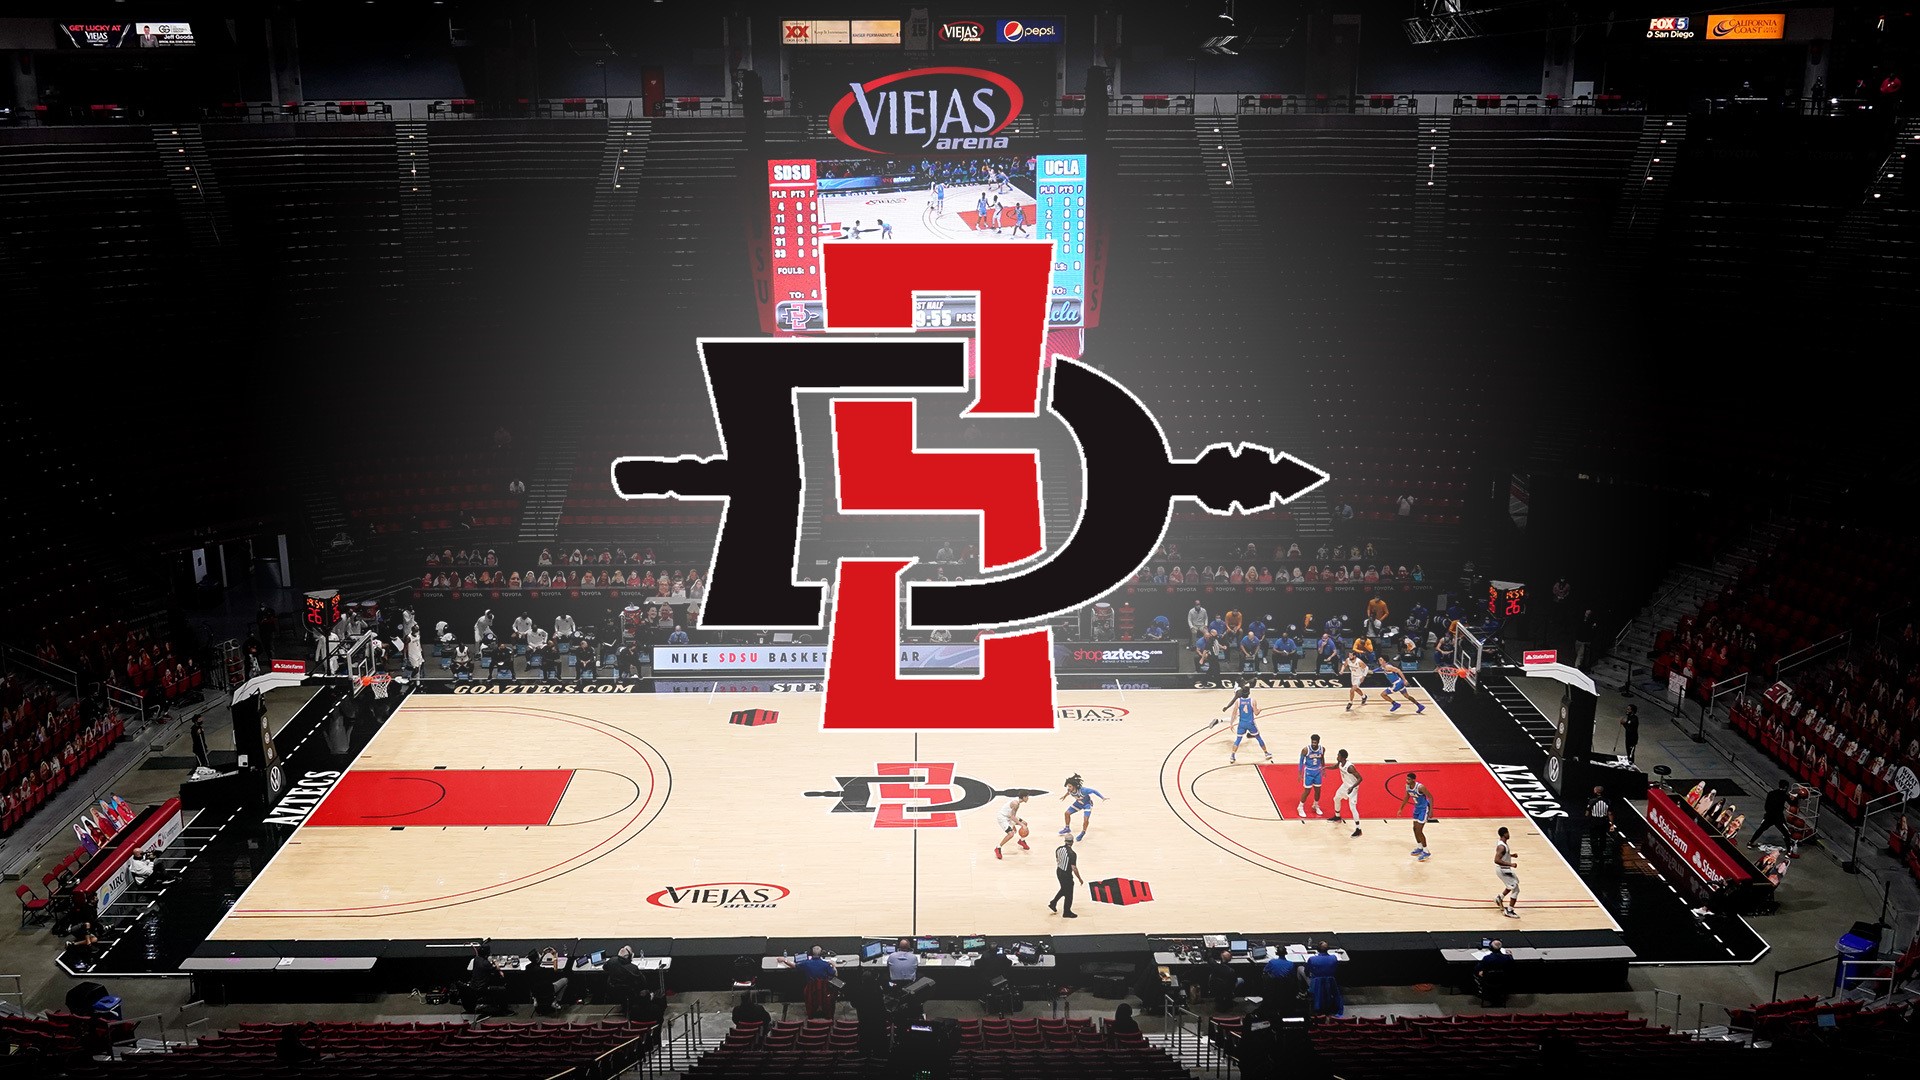 The Aztecs will tip-off against UC Riverside in the regular-season opener at 7 p.m. inside Viejas Arena. Gates will open to fans at 5:30 p.m.